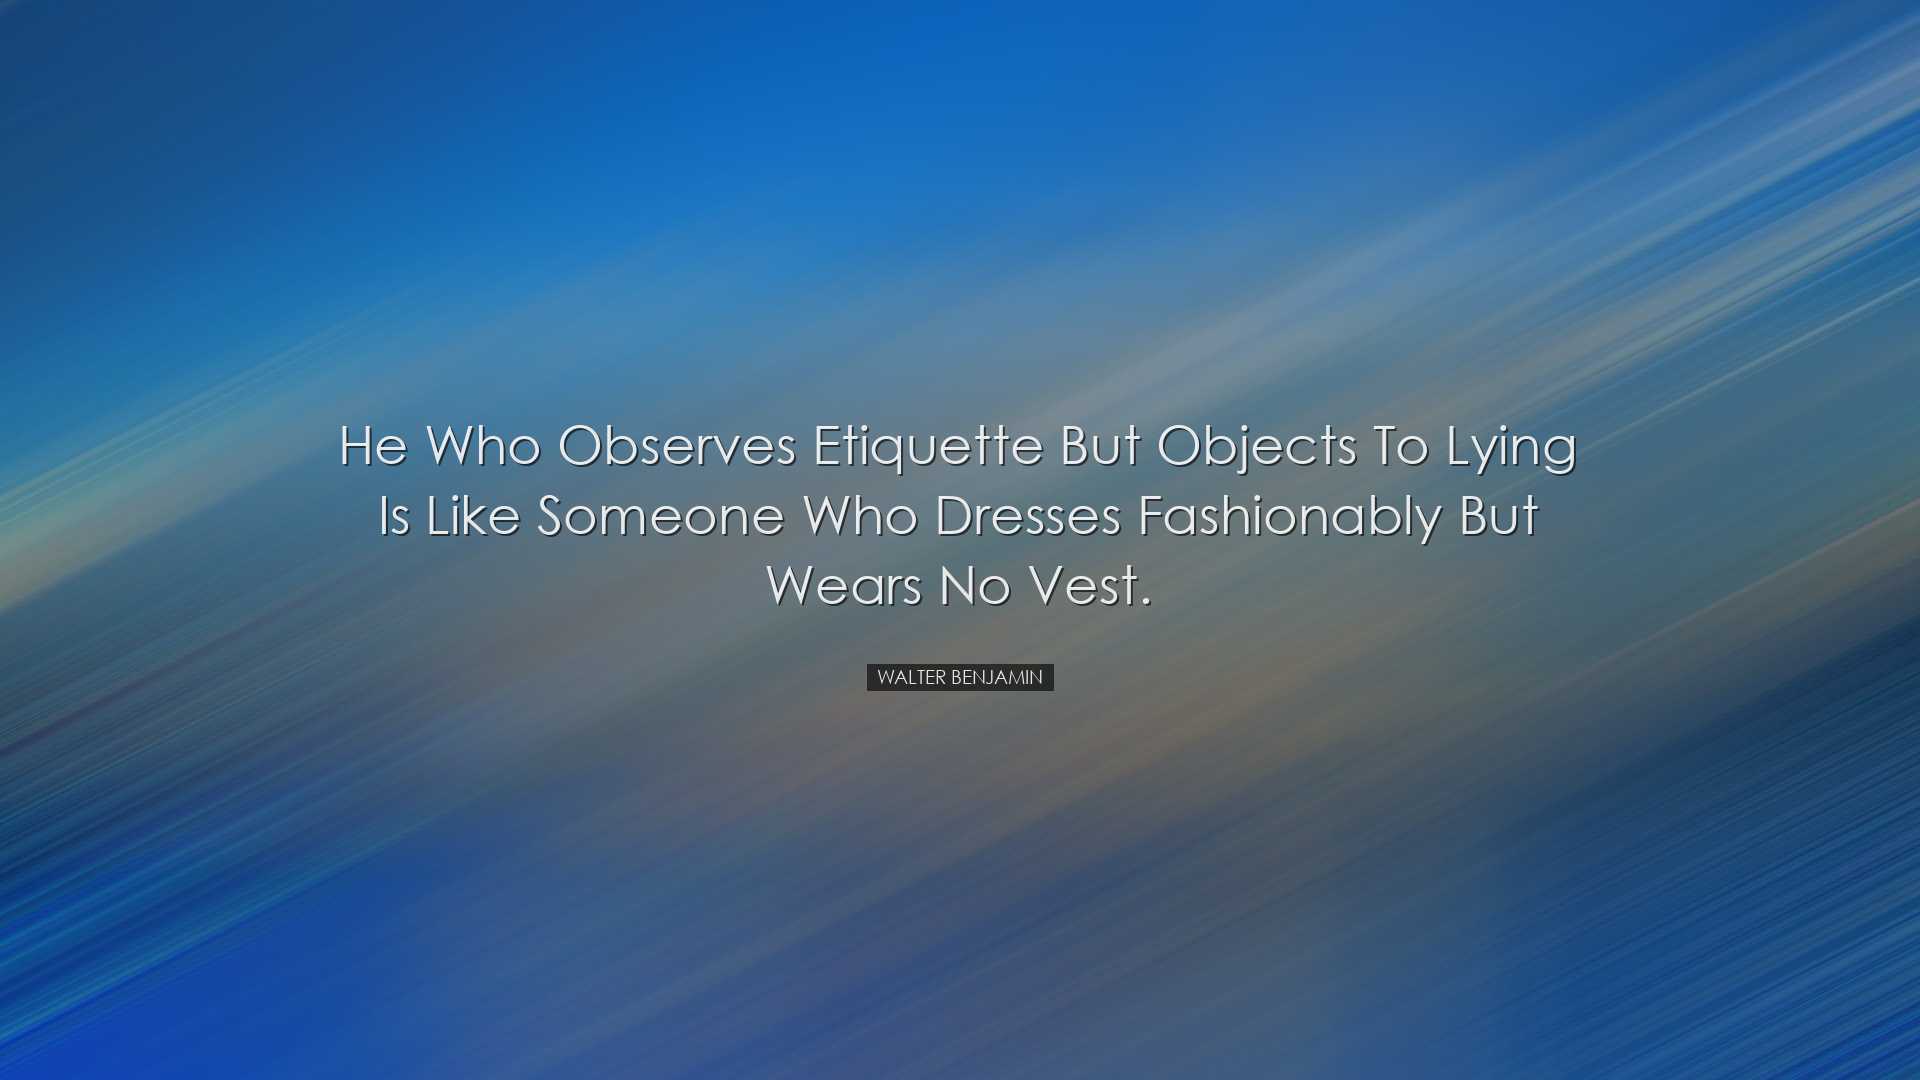 He who observes etiquette but objects to lying is like someone who